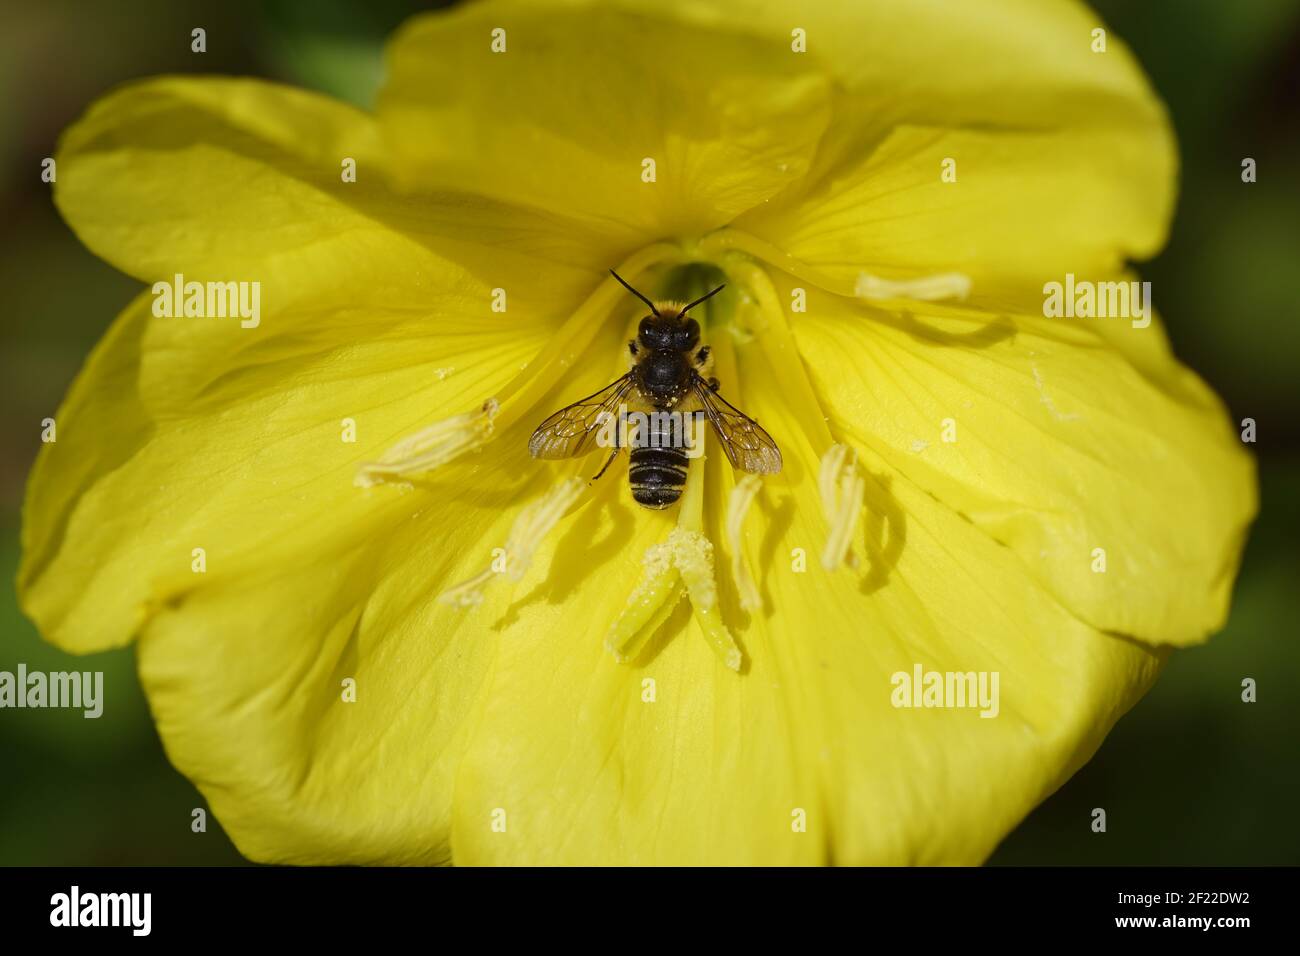 Leafcutter bee (Megachile) of the family mason bees (Megachilidae) on a flower of common evening-primrose (Oenothera biennis) Stock Photo